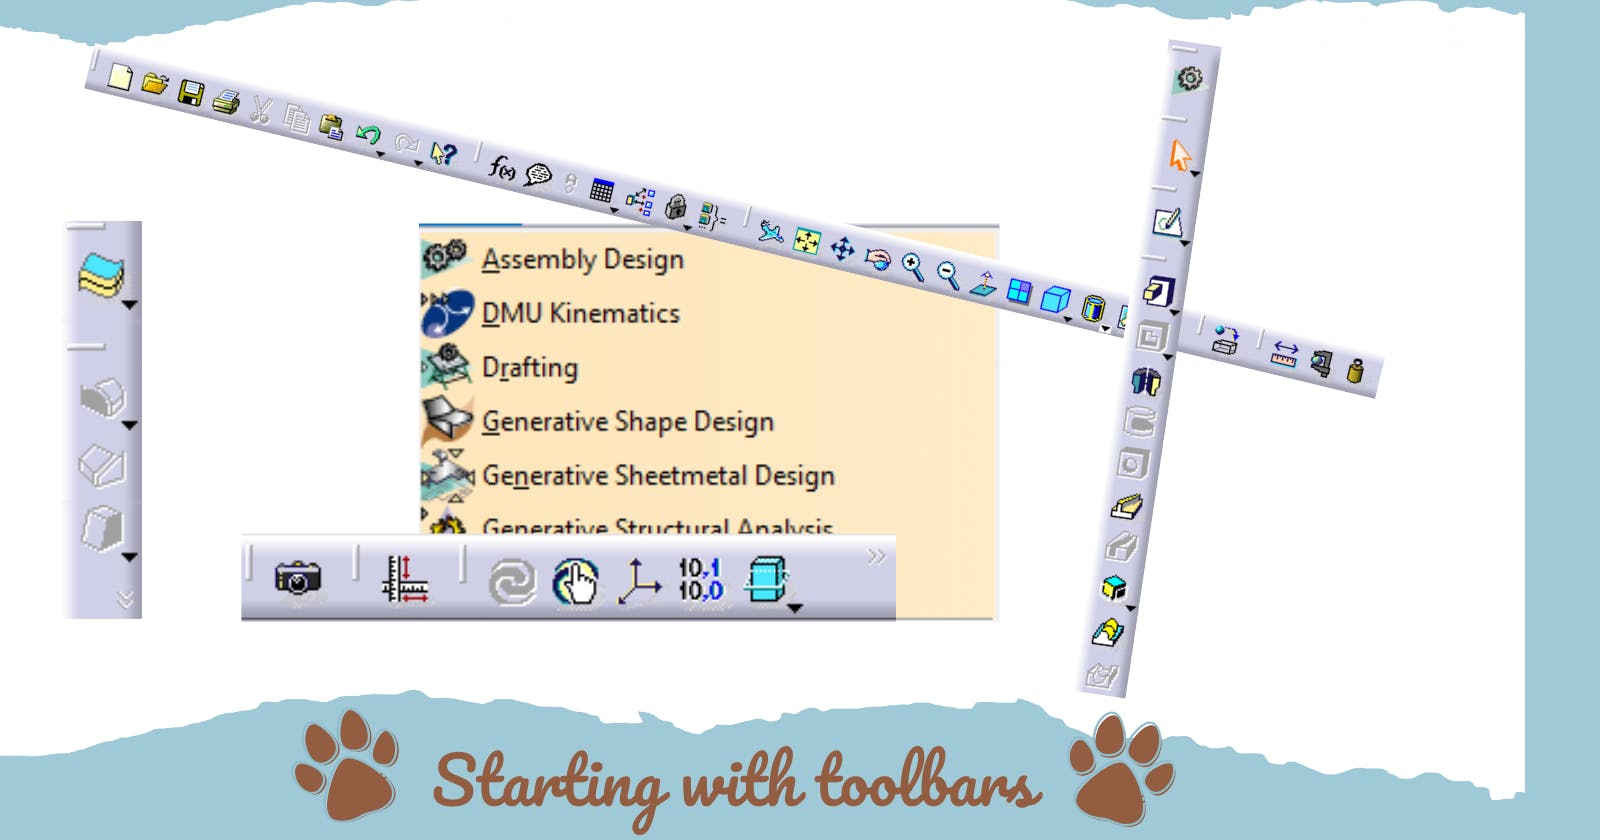 Playing with Toolbars in CATIA V5. Learn how to edit them